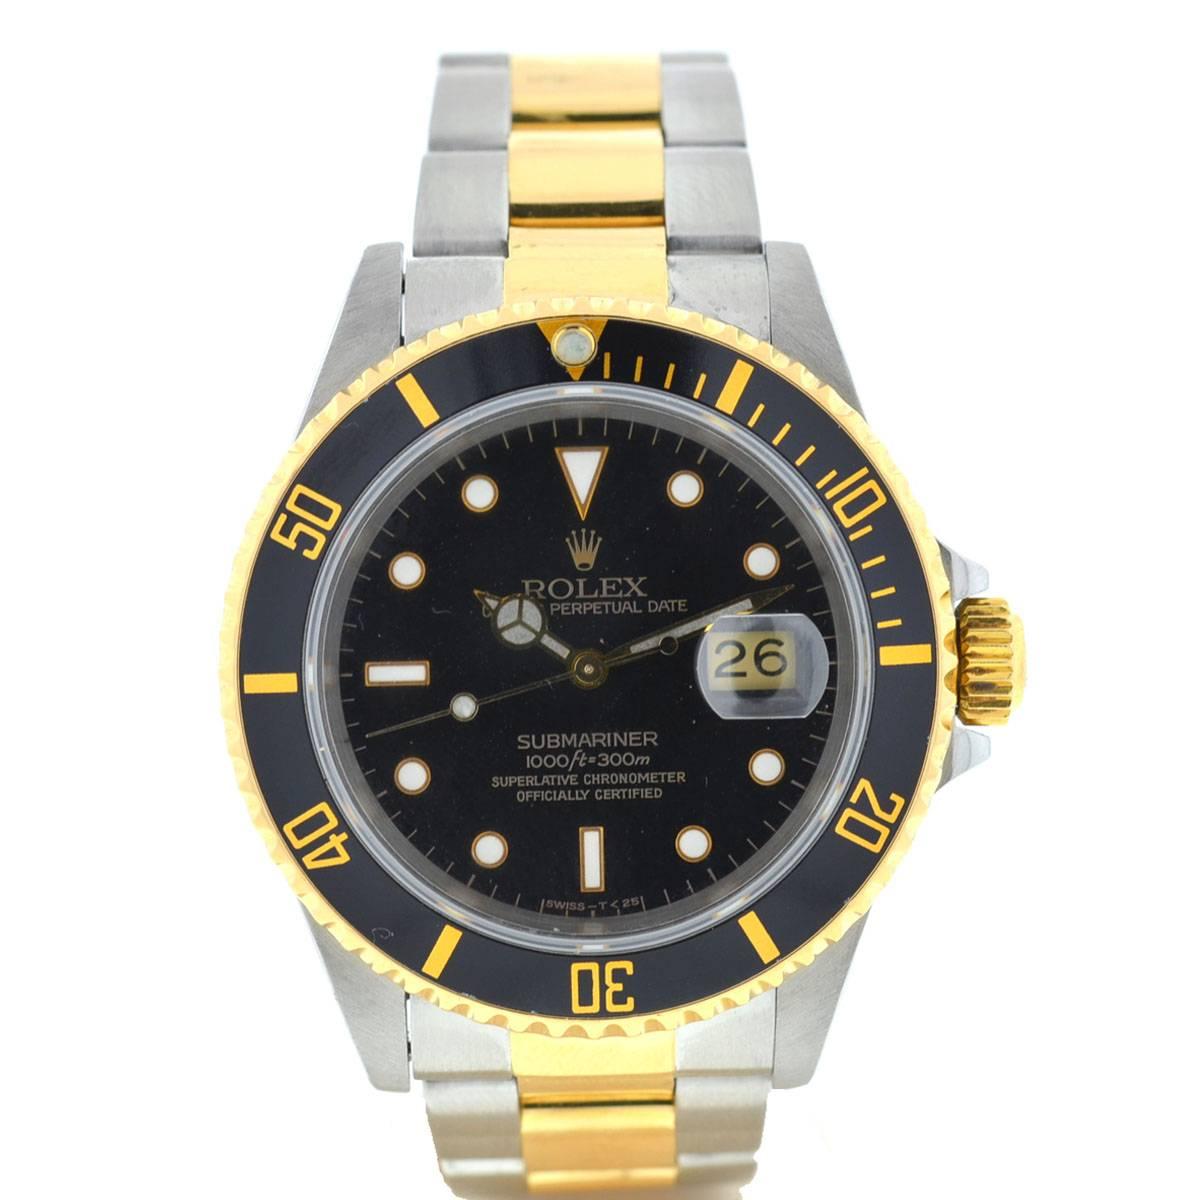 Rolex 16613 Submariner Two-Tone Black Dial Automatic Watch